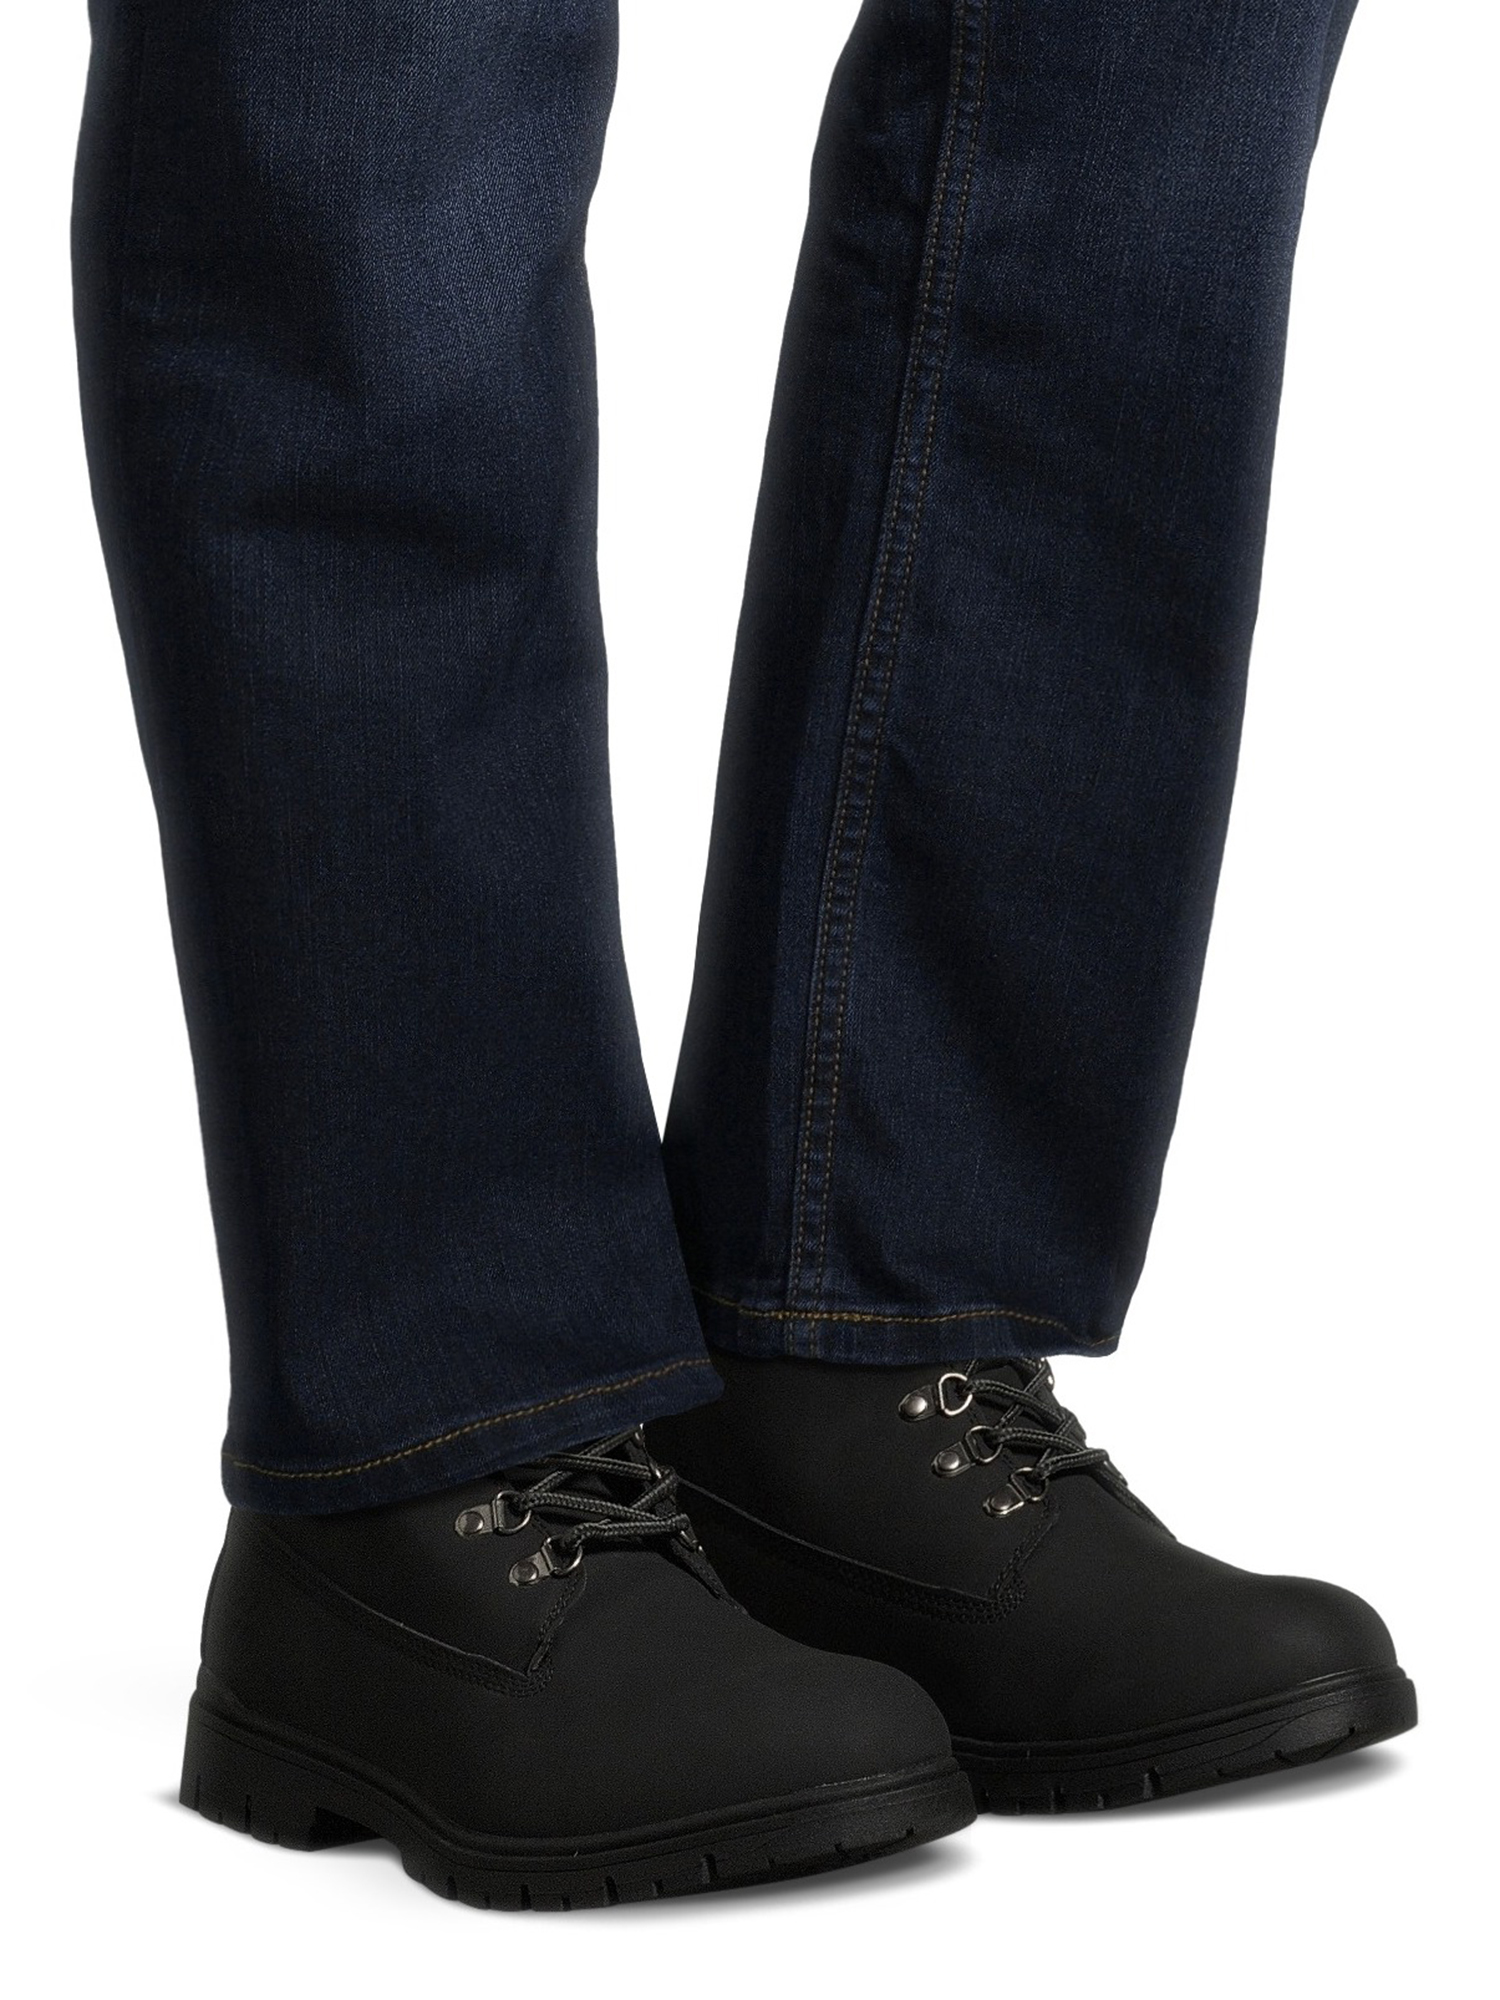 Rocawear Men's Austin Lace Up Boots - image 2 of 5